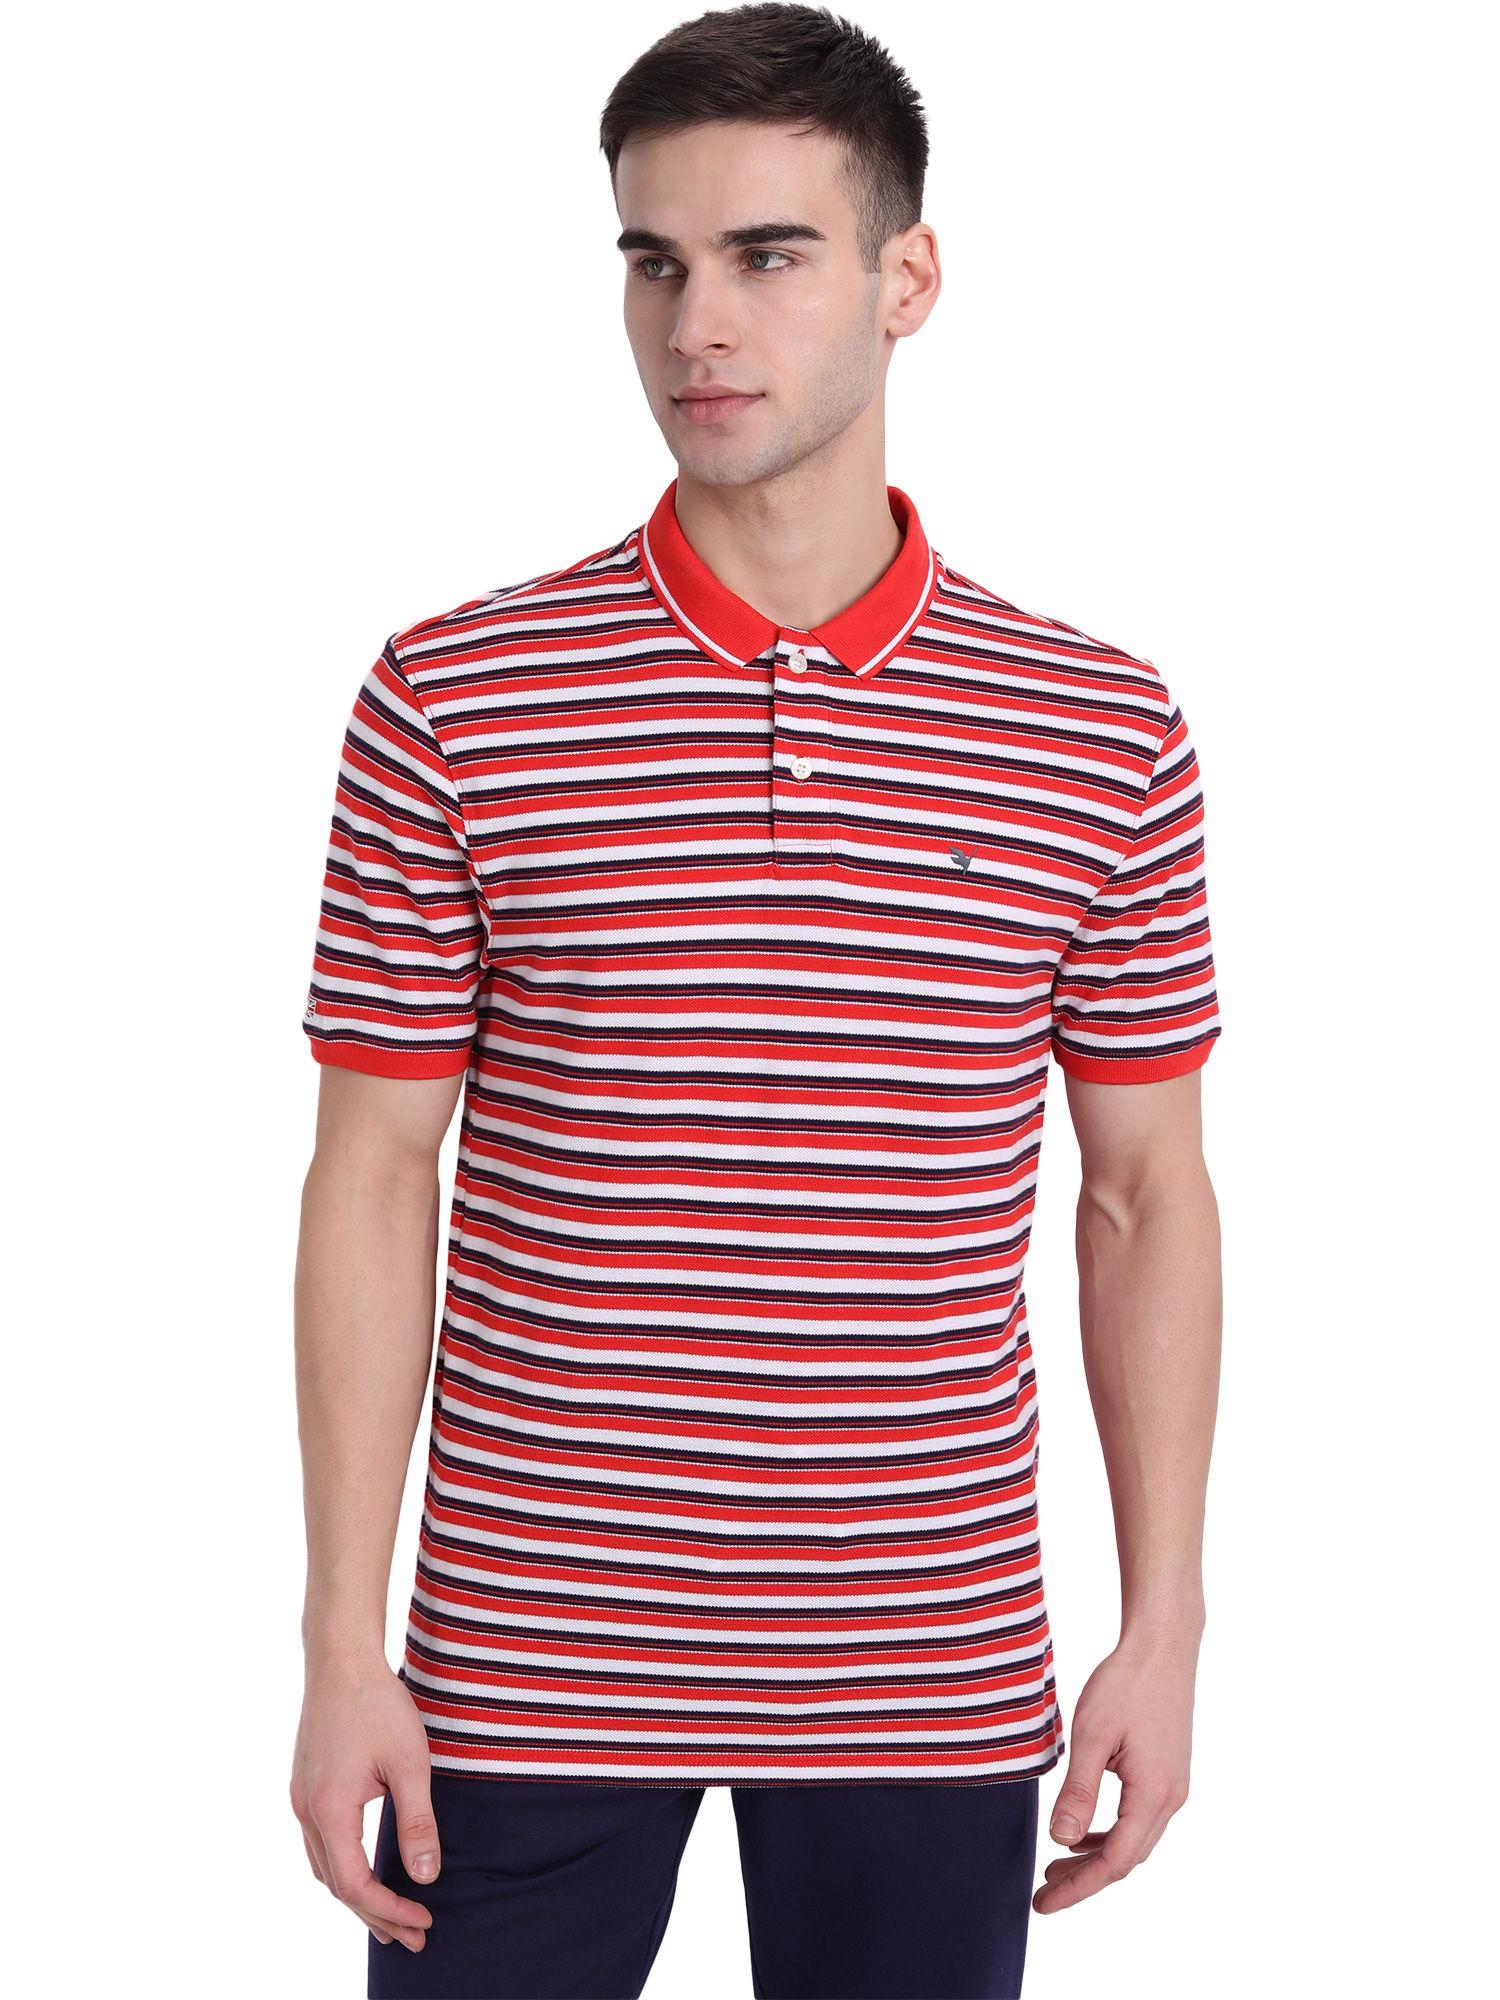 mens stripes fiery red - white - navy polo t-shirt